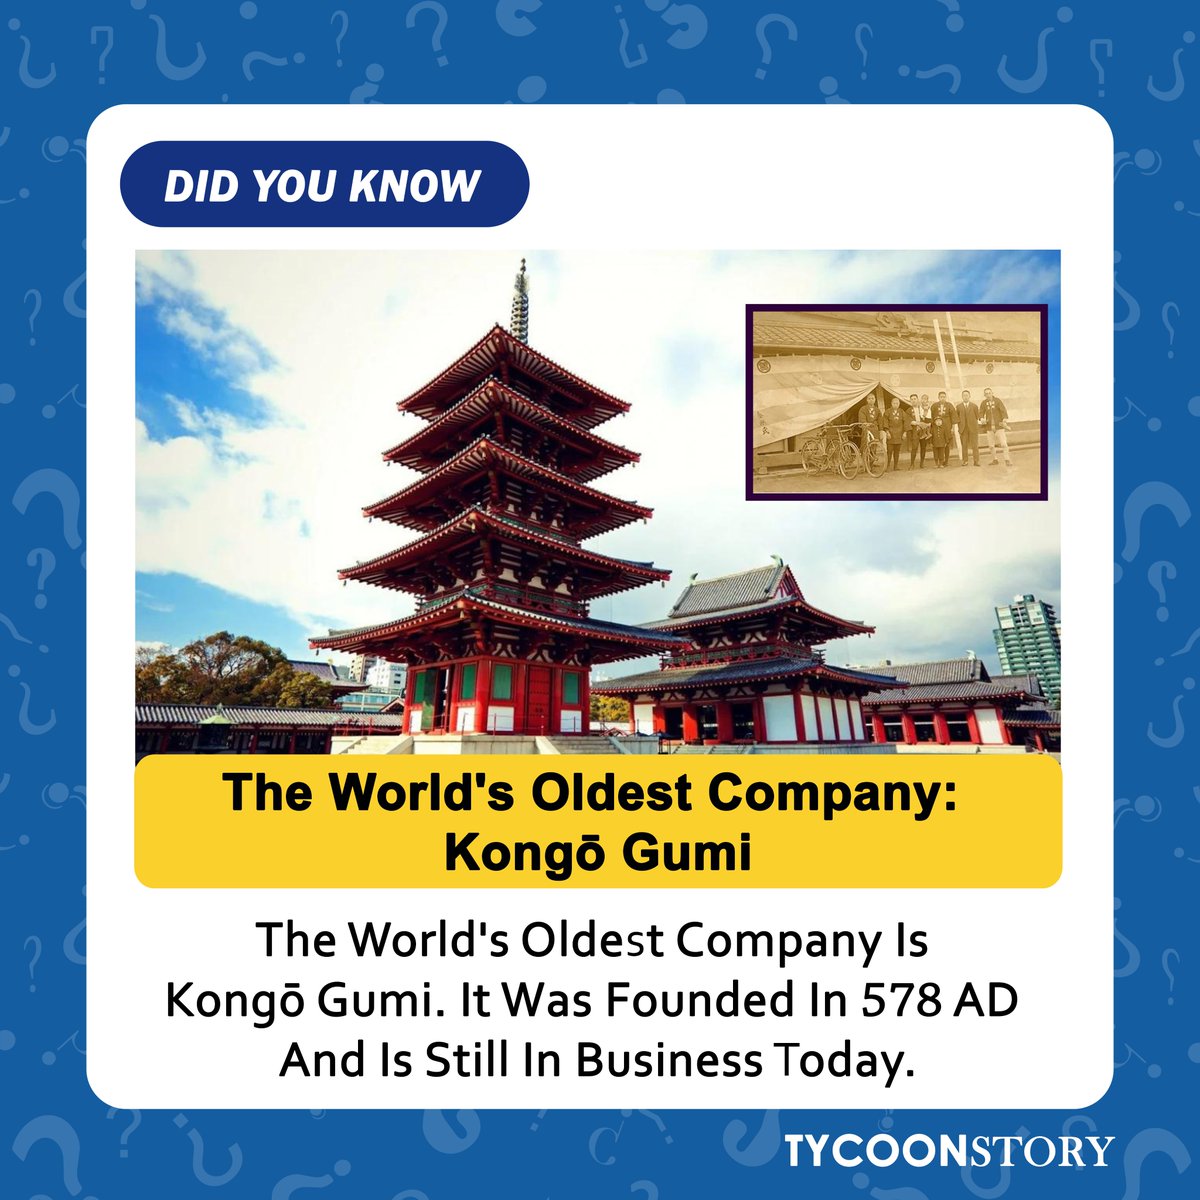 #Didyouknow #facts #knowledge #didyouknowfacts #dailyfacts #factsdaily #factsoftheday #unknownfacts #truefacts #constructioncompany #business